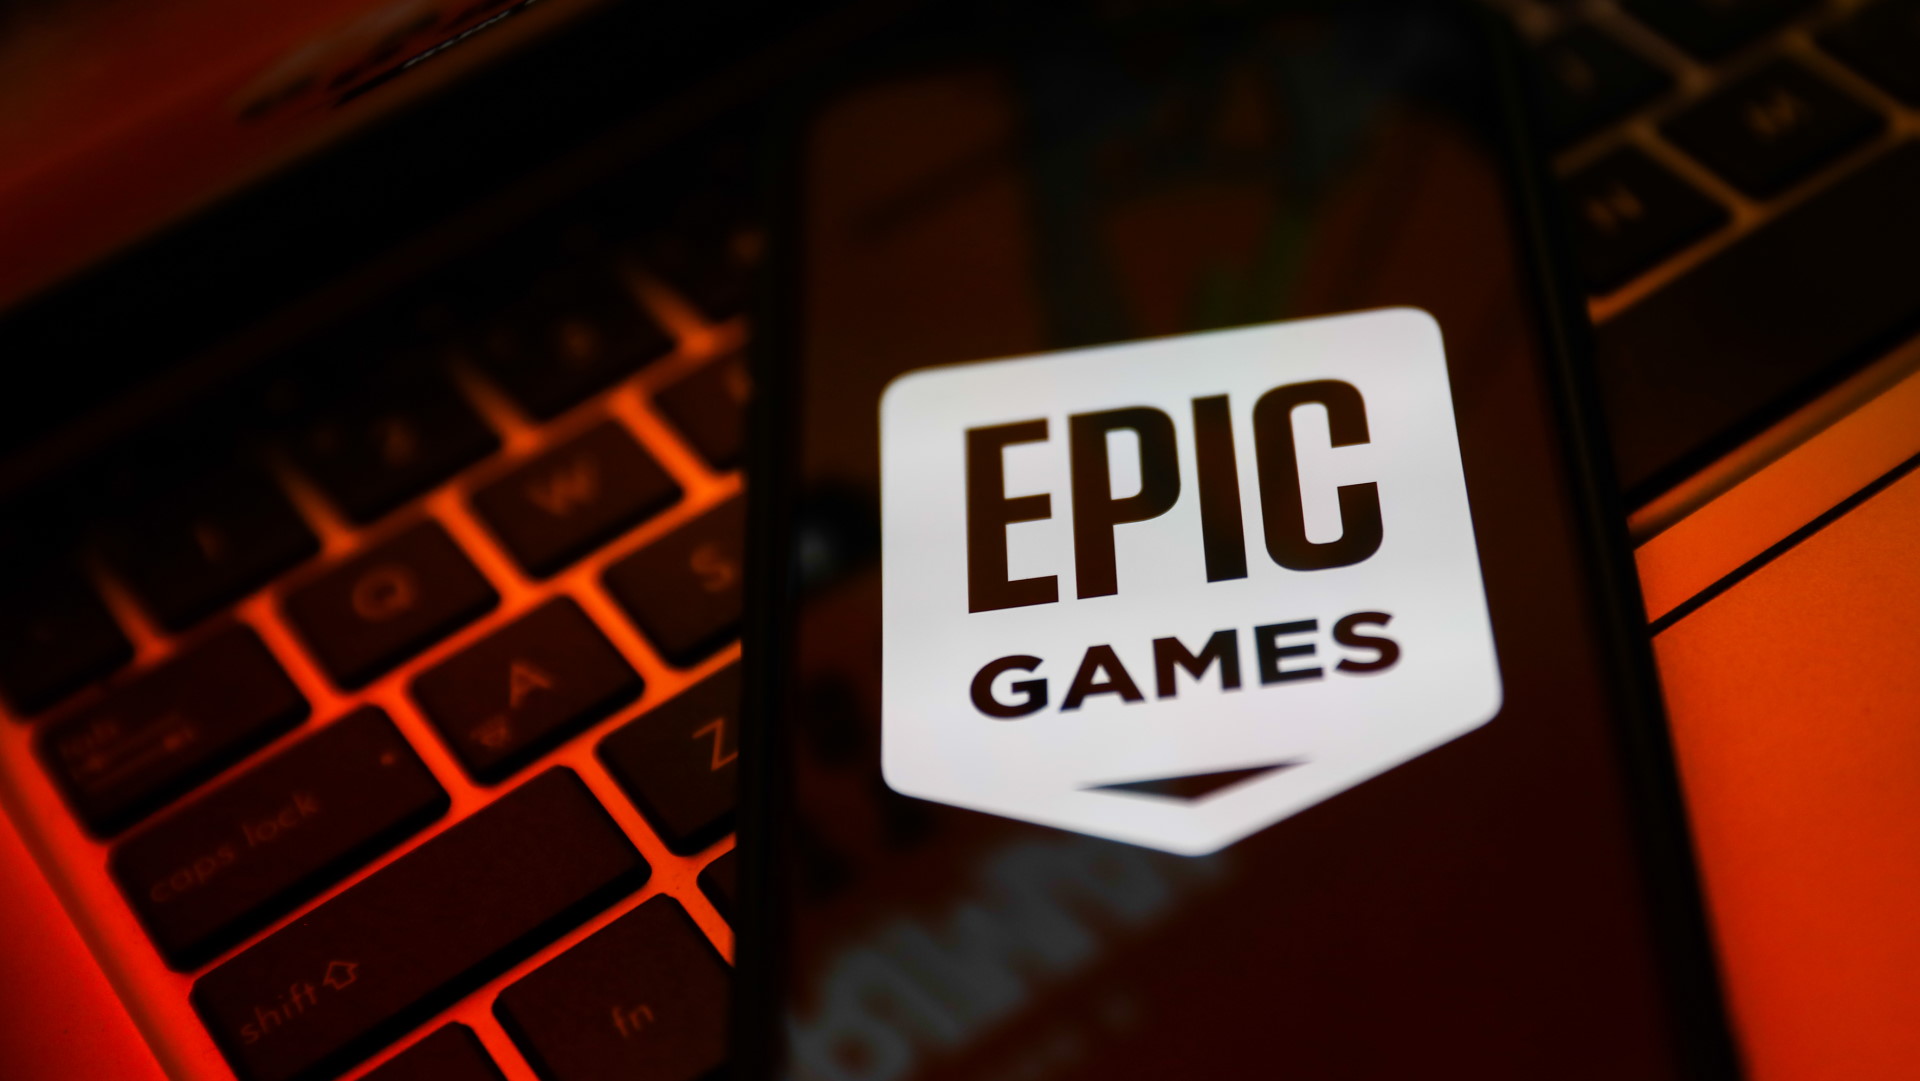  Epic, Xbox contributing Fortnite proceeds to humanitarian relief in Ukraine 